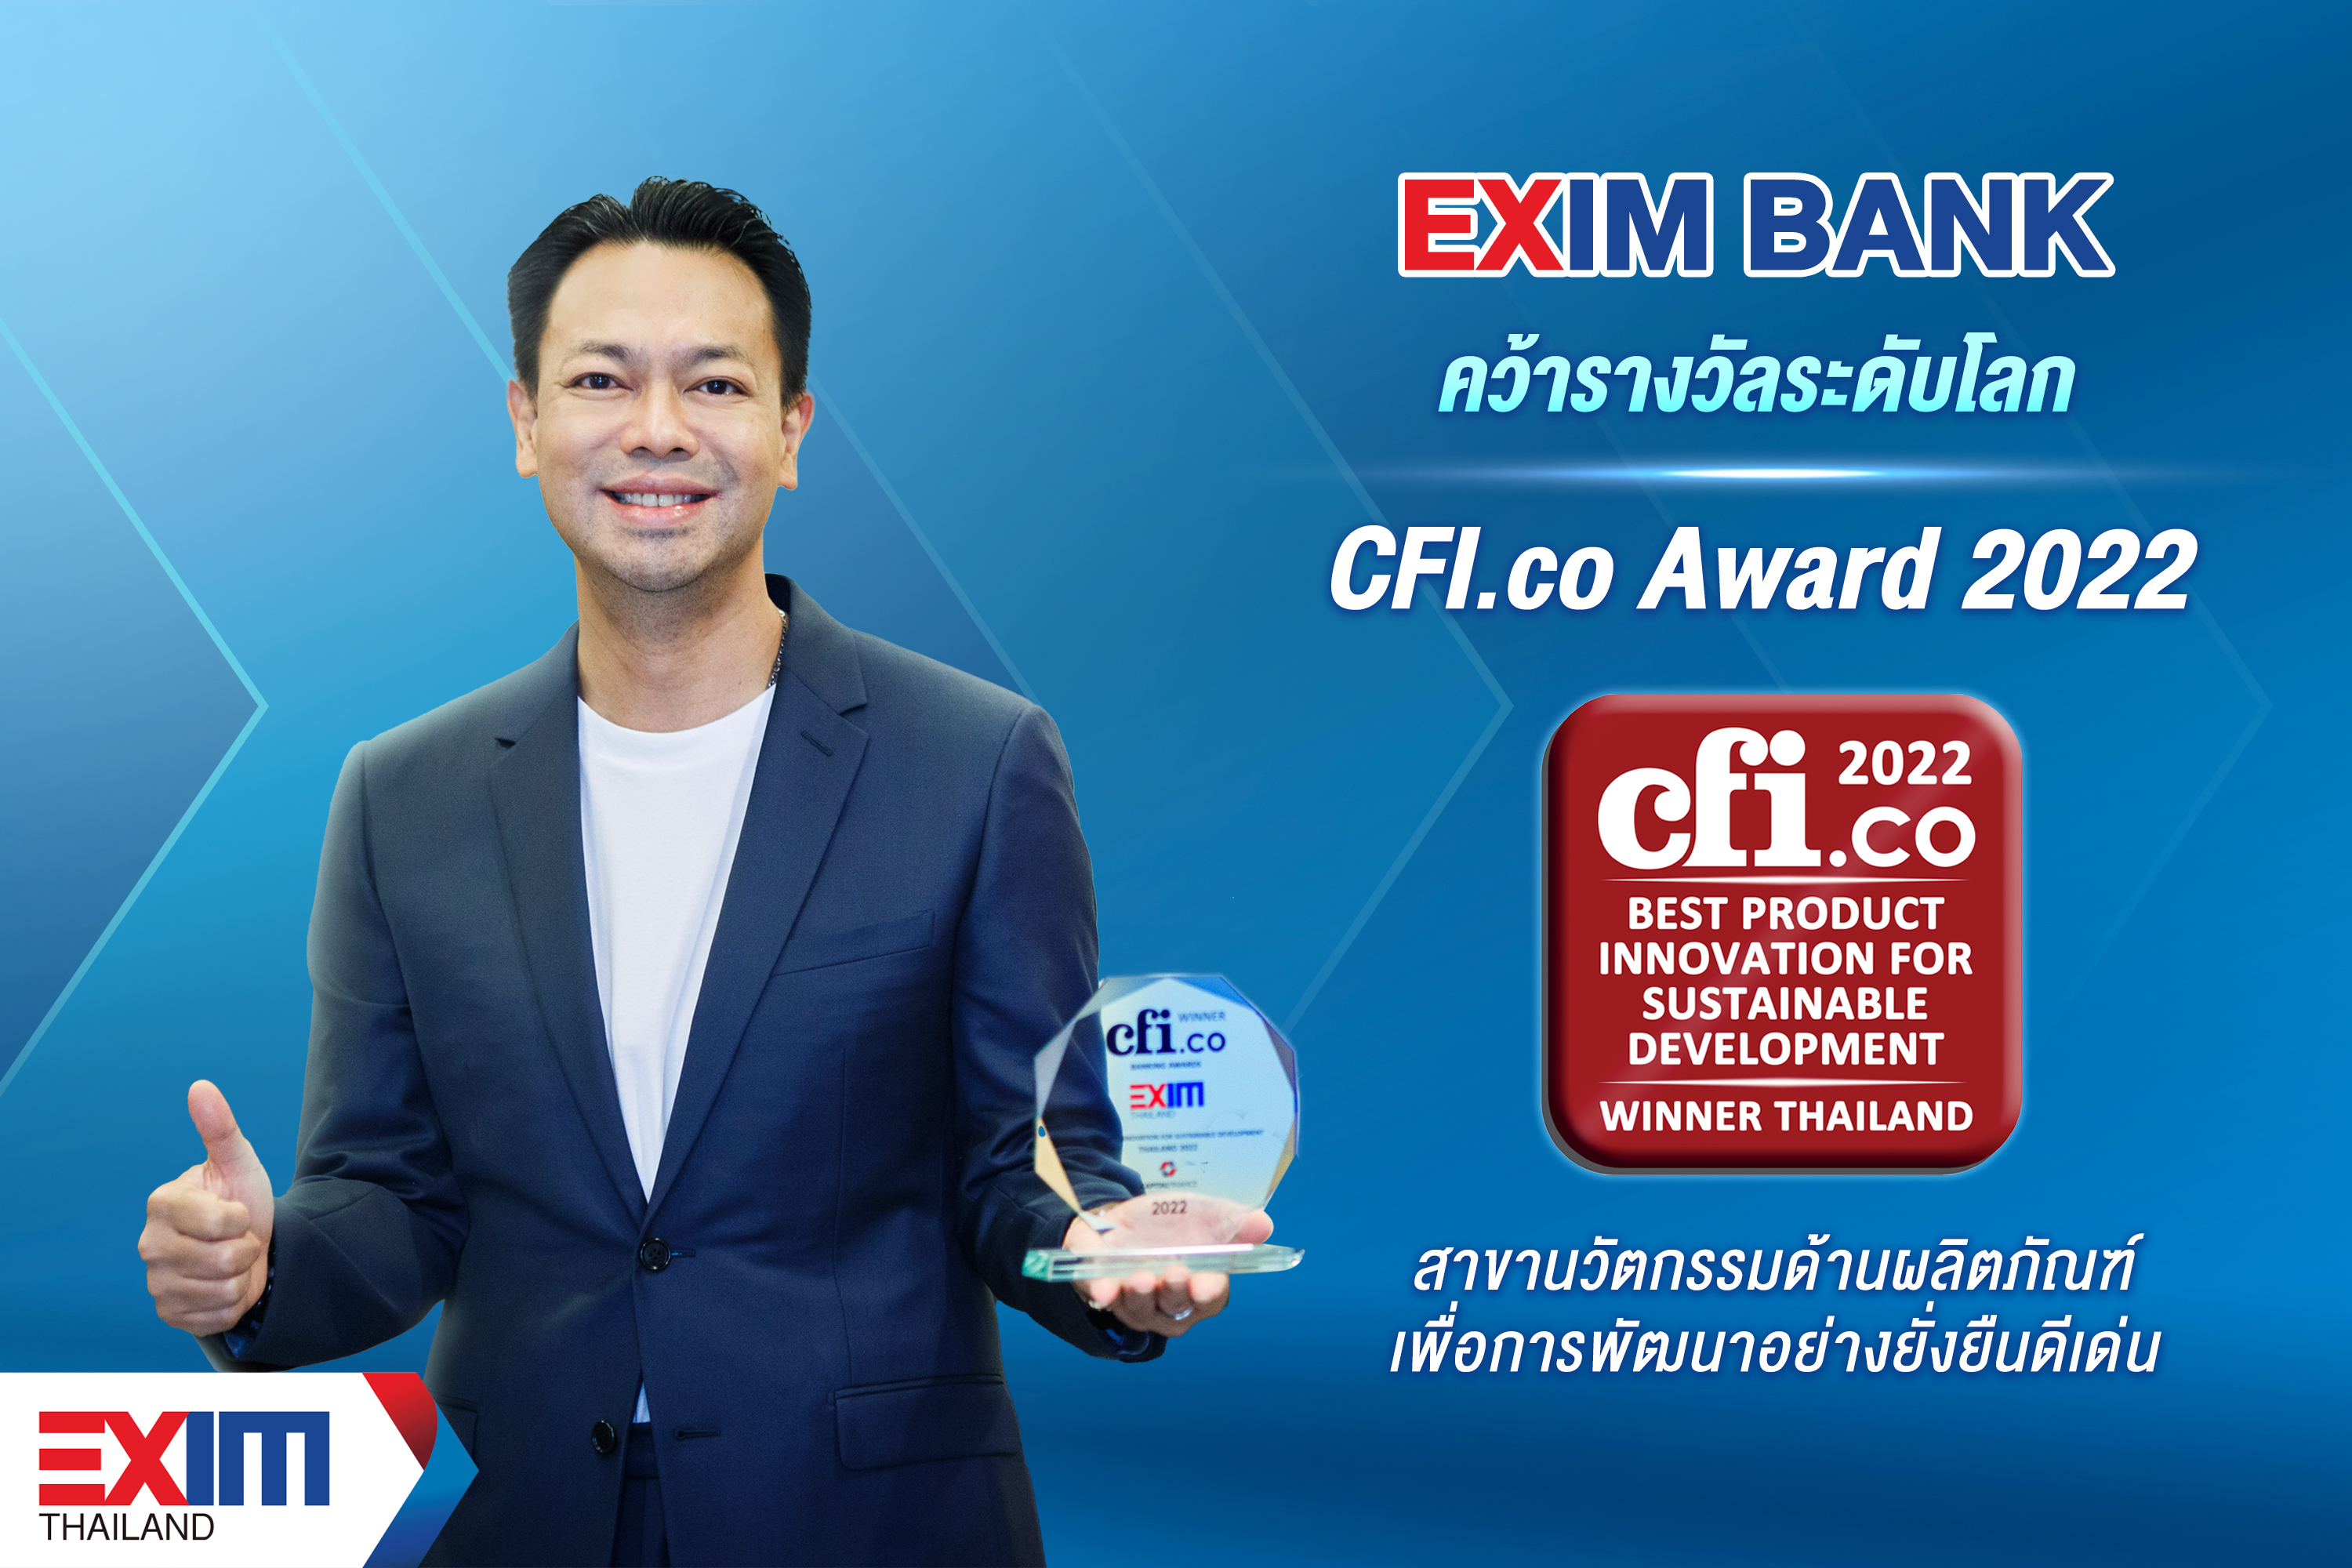 EXIM Thailand Receives CFI.co Award 2022  for Best Product Innovation for Sustainable Development  from Capital Finance International, the United Kingdom